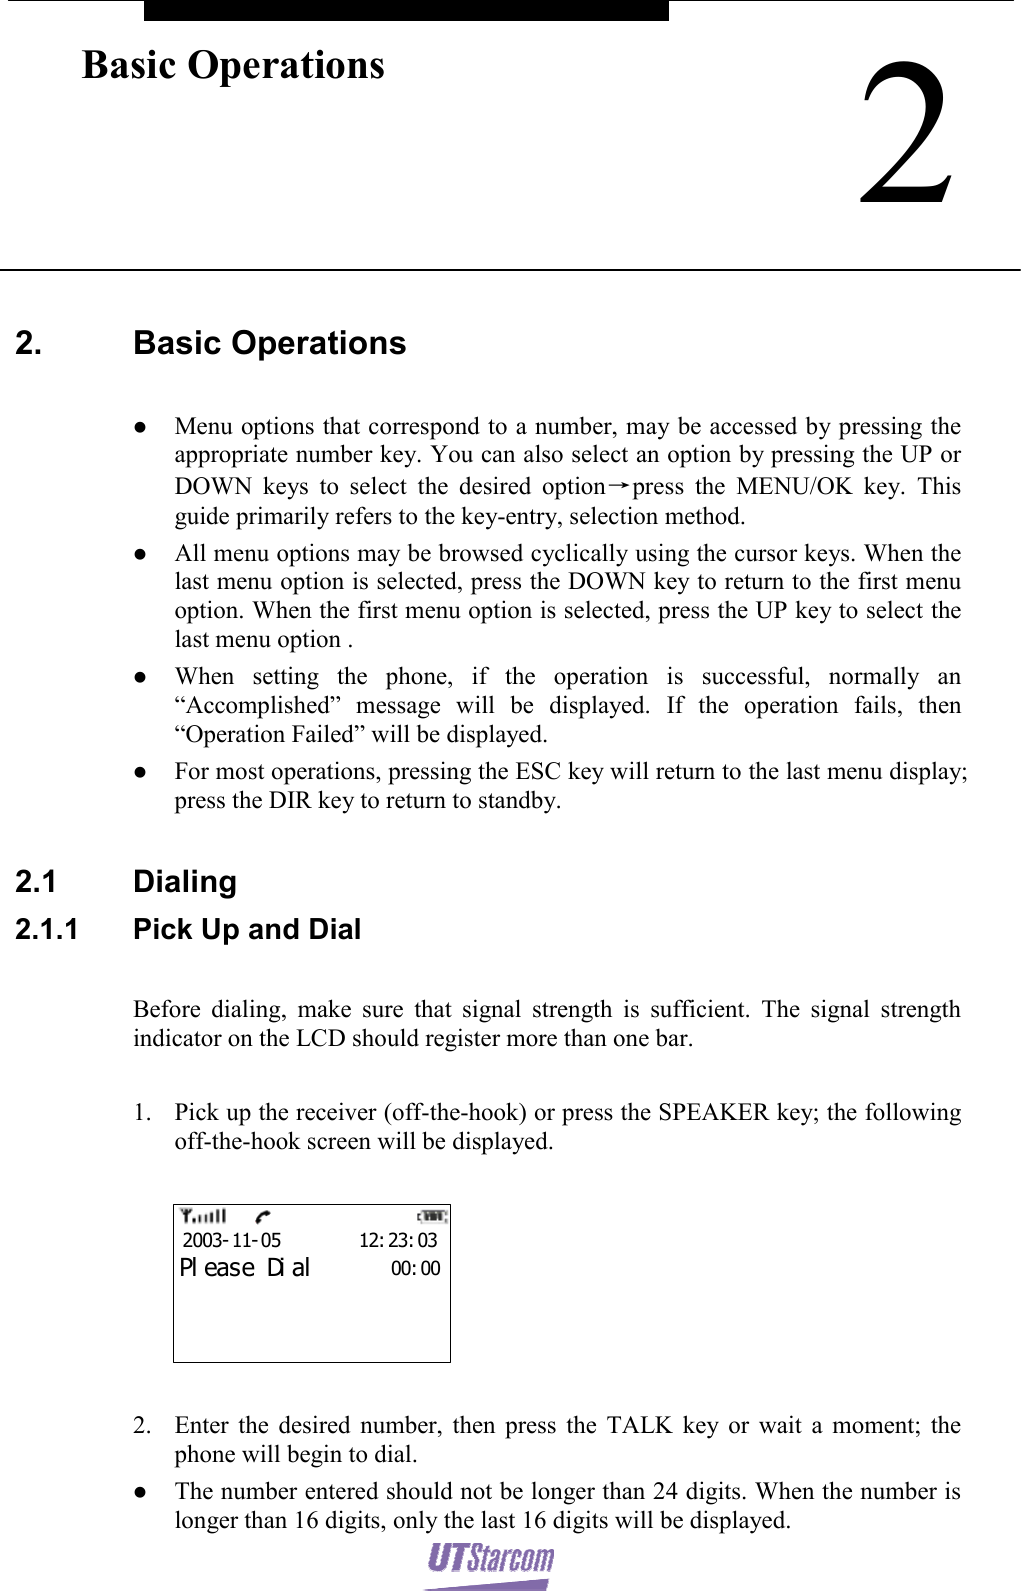    2Basic Operations  2. Basic Operations   z Menu options that correspond to a number, may be accessed by pressing the appropriate number key. You can also select an option by pressing the UP or DOWN keys to select the desired option→press the MENU/OK key. This guide primarily refers to the key-entry, selection method. z All menu options may be browsed cyclically using the cursor keys. When the last menu option is selected, press the DOWN key to return to the first menu option. When the first menu option is selected, press the UP key to select the last menu option . z When setting the phone, if the operation is successful, normally an “Accomplished” message will be displayed. If the operation fails, then “Operation Failed” will be displayed. z For most operations, pressing the ESC key will return to the last menu display; press the DIR key to return to standby.  2.1 Dialing 2.1.1  Pick Up and Dial  Before dialing, make sure that signal strength is sufficient. The signal strength indicator on the LCD should register more than one bar.  1. Pick up the receiver (off-the-hook) or press the SPEAKER key; the following off-the-hook screen will be displayed.  00: 002003- 11- 05        12: 23: 03Pl eas e Di al  2. Enter the desired number, then press the TALK key or wait a moment; the phone will begin to dial. z The number entered should not be longer than 24 digits. When the number is longer than 16 digits, only the last 16 digits will be displayed. 